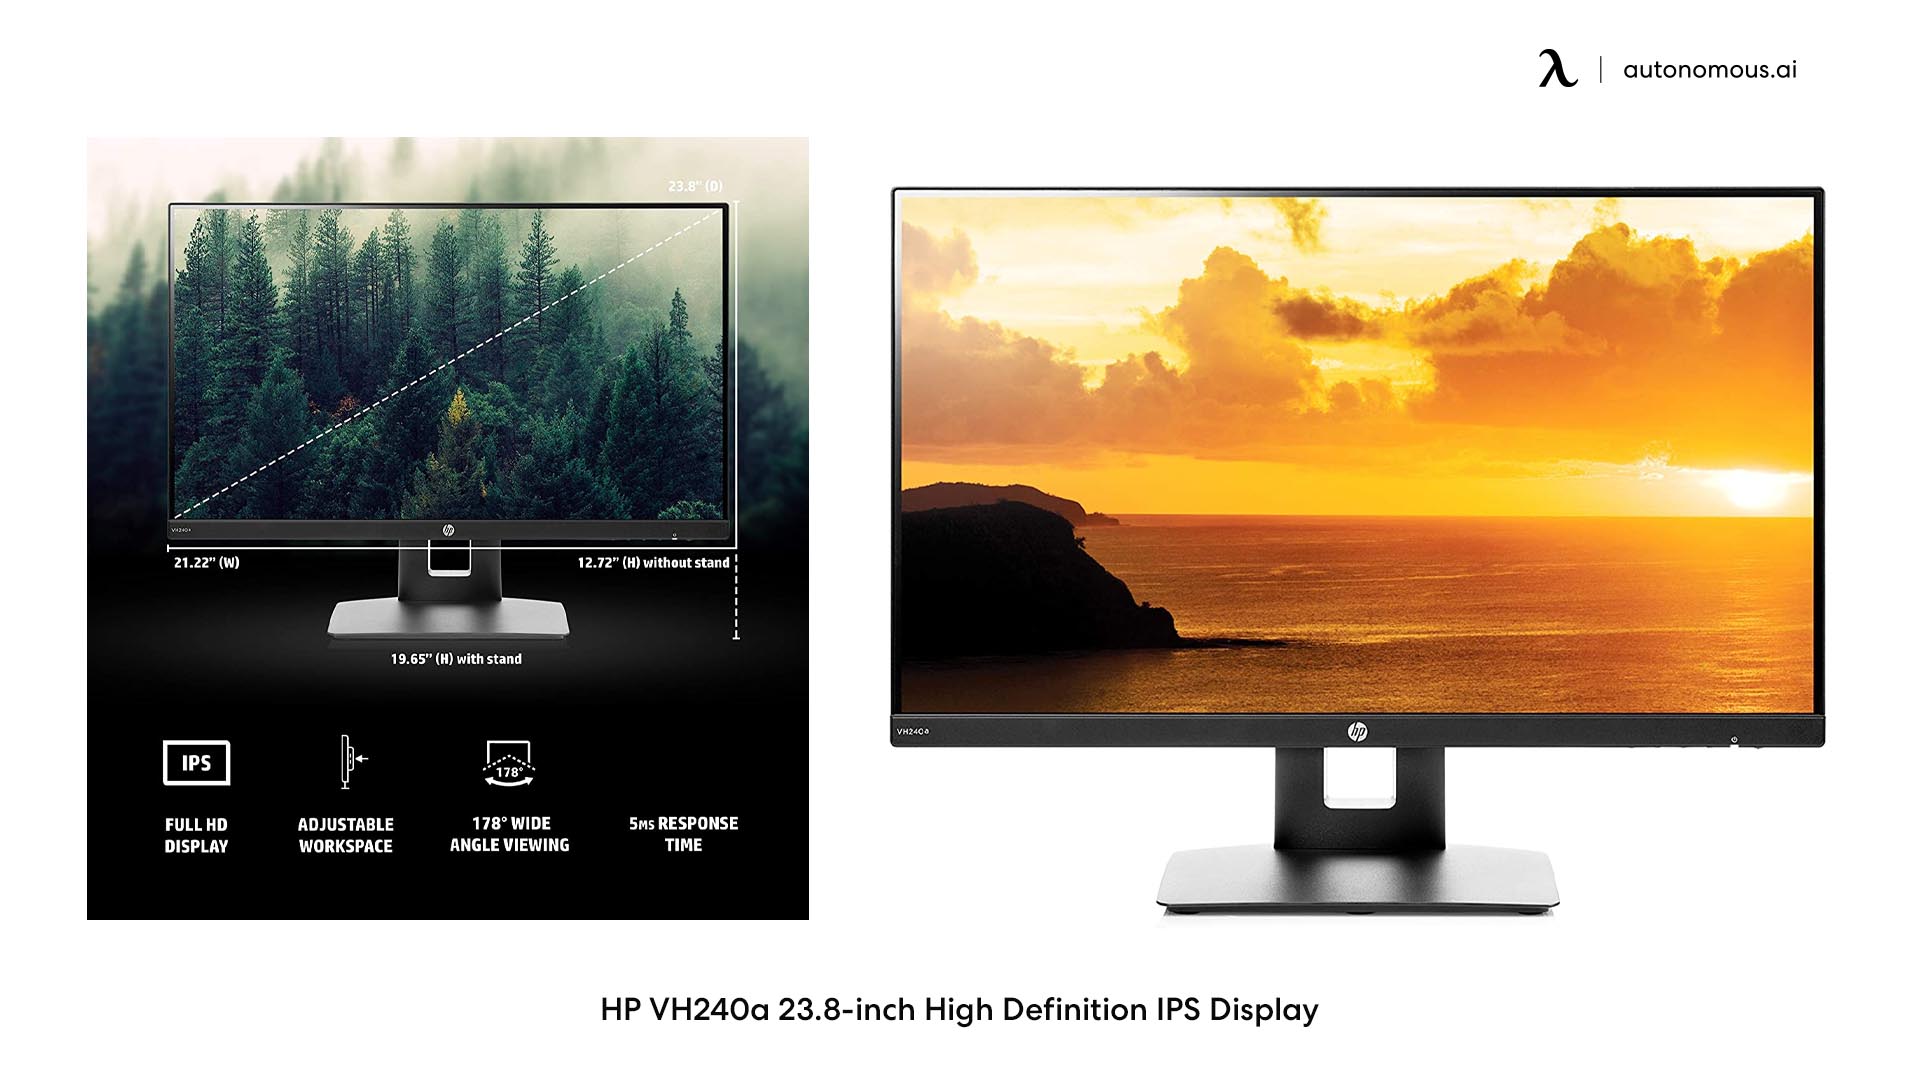 HP VH240a 23.8-inch High Definition IPS Display